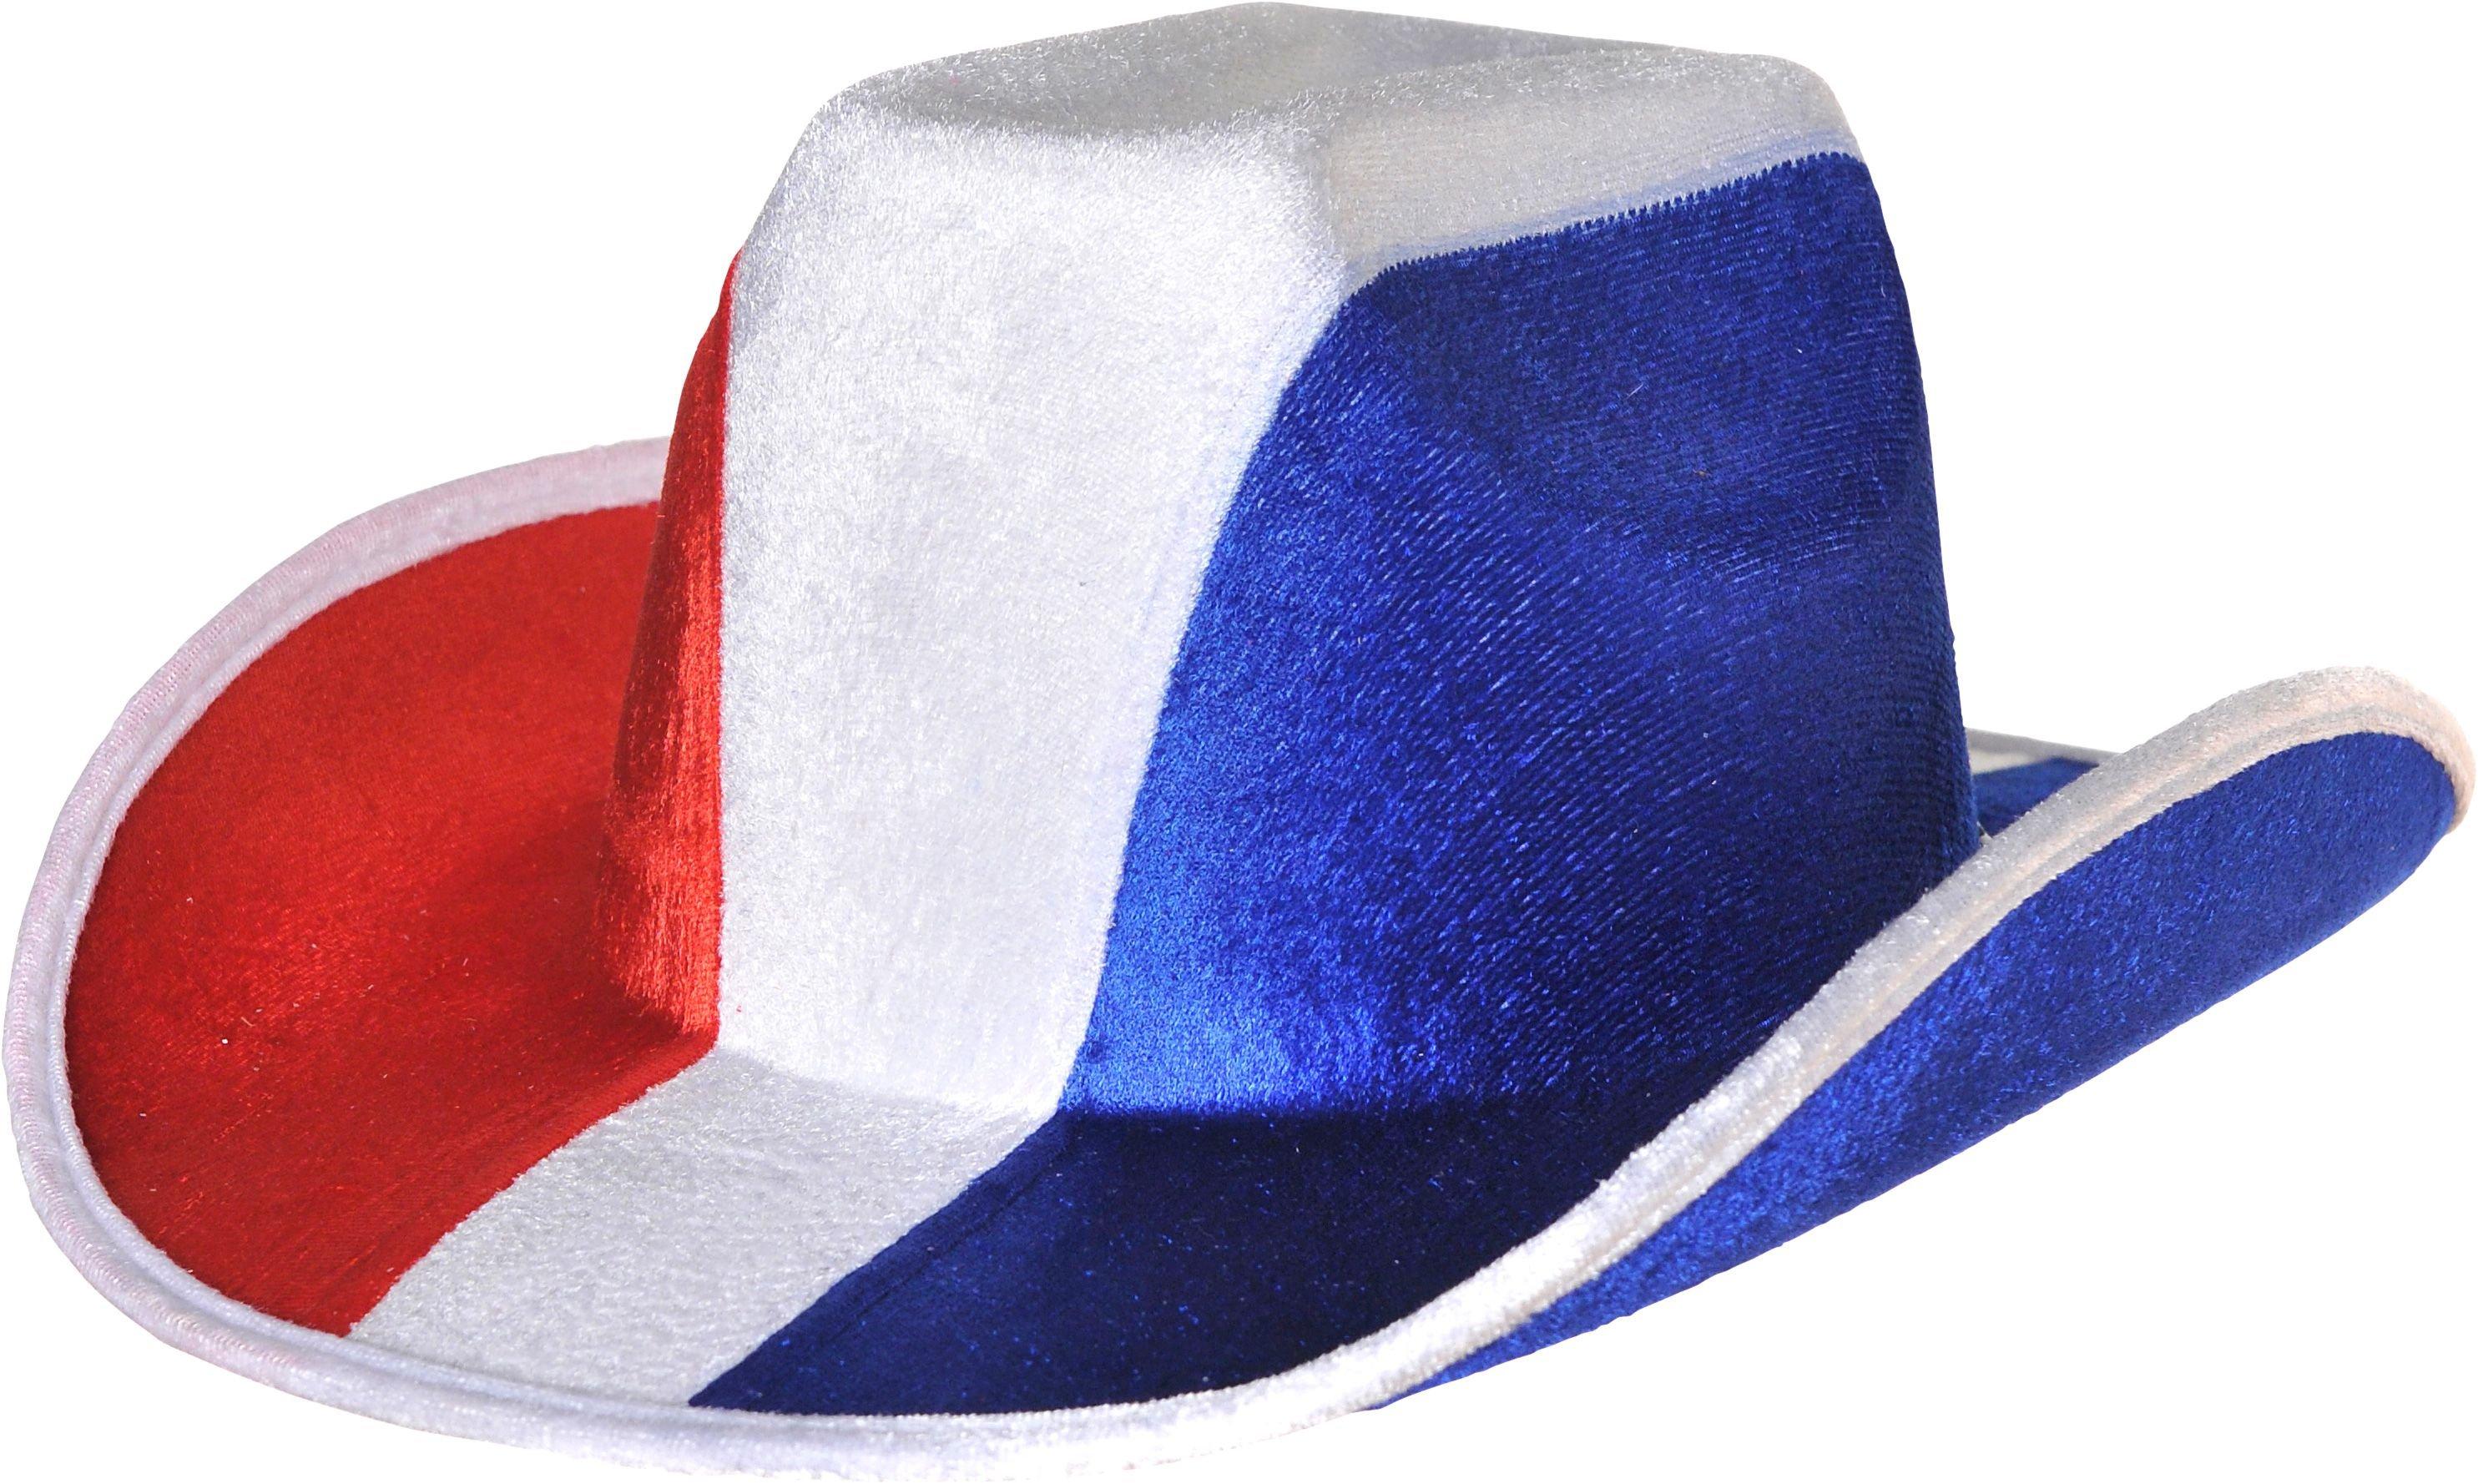  Red White and Blue Bucket Hat with Plastic Pockets - K